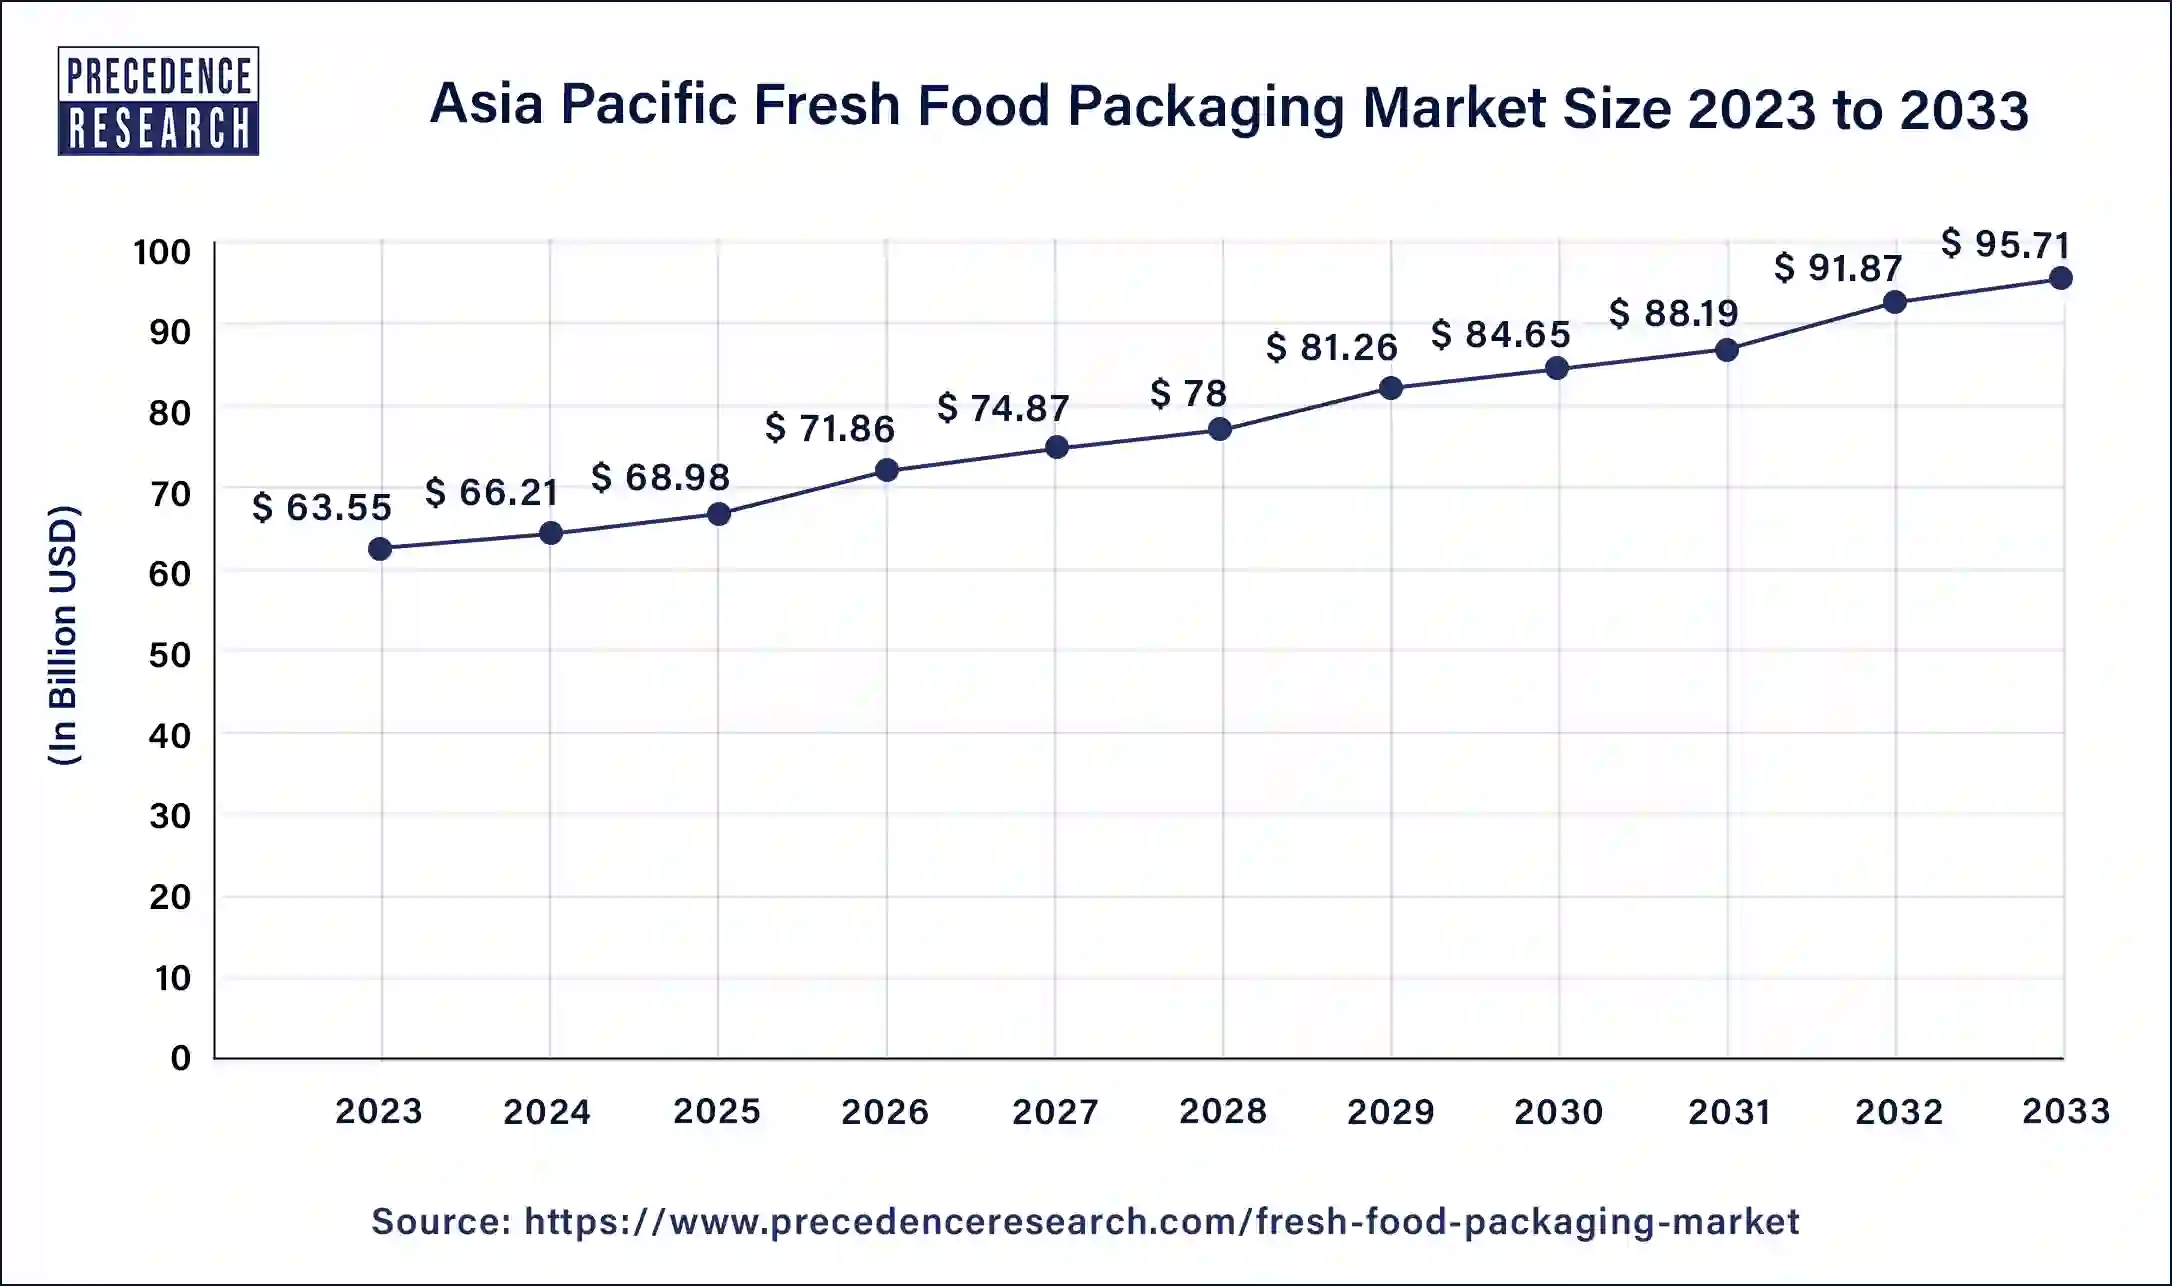 Asia Pacific Fresh Food Packaging Market Size 2024 to 2033